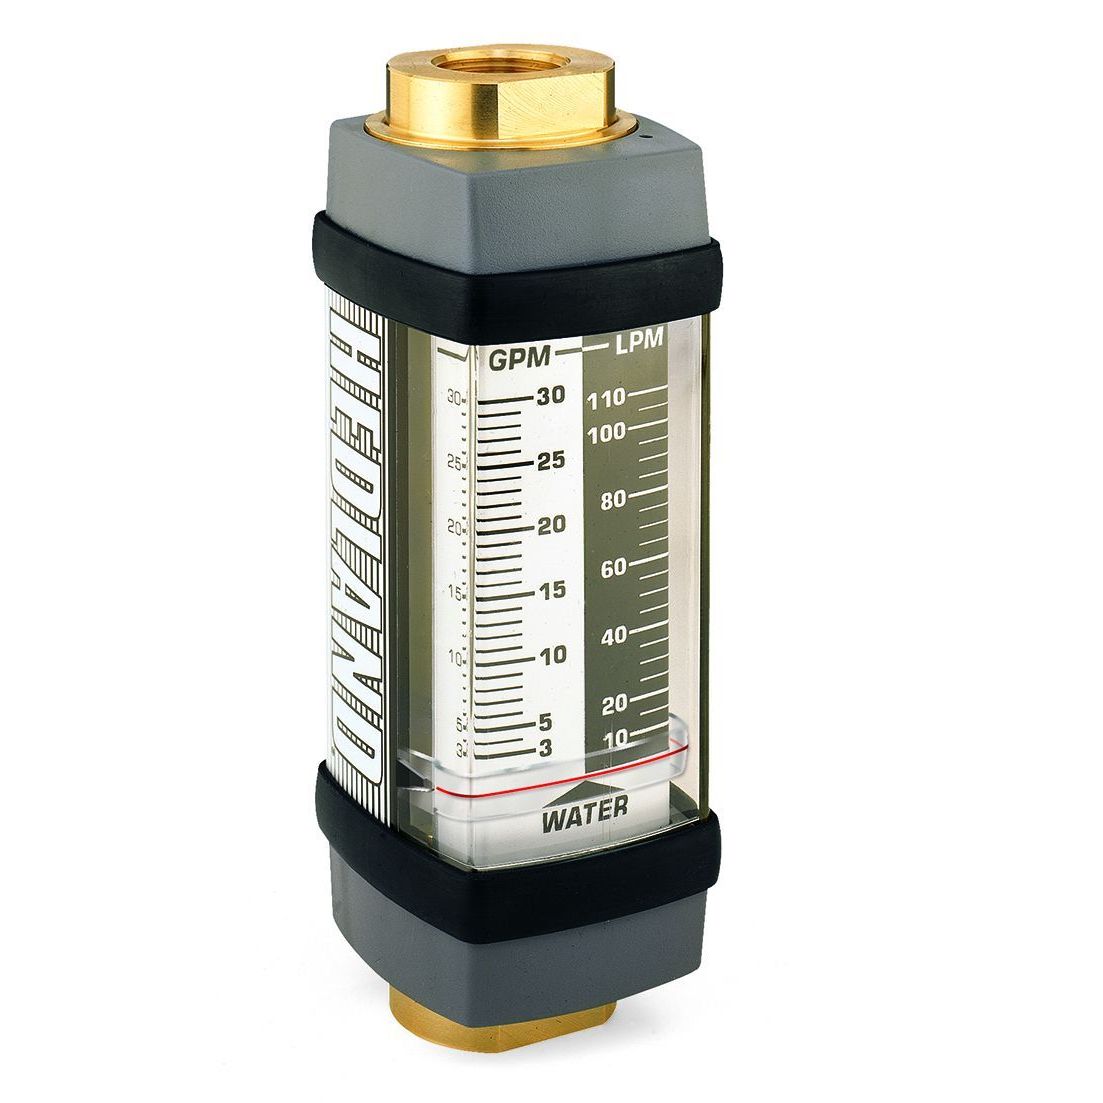 H804B-030 : Hedland 3500psi Brass Flow Meter for Water, #20 SAE (1.25), 3 to 30 GPM